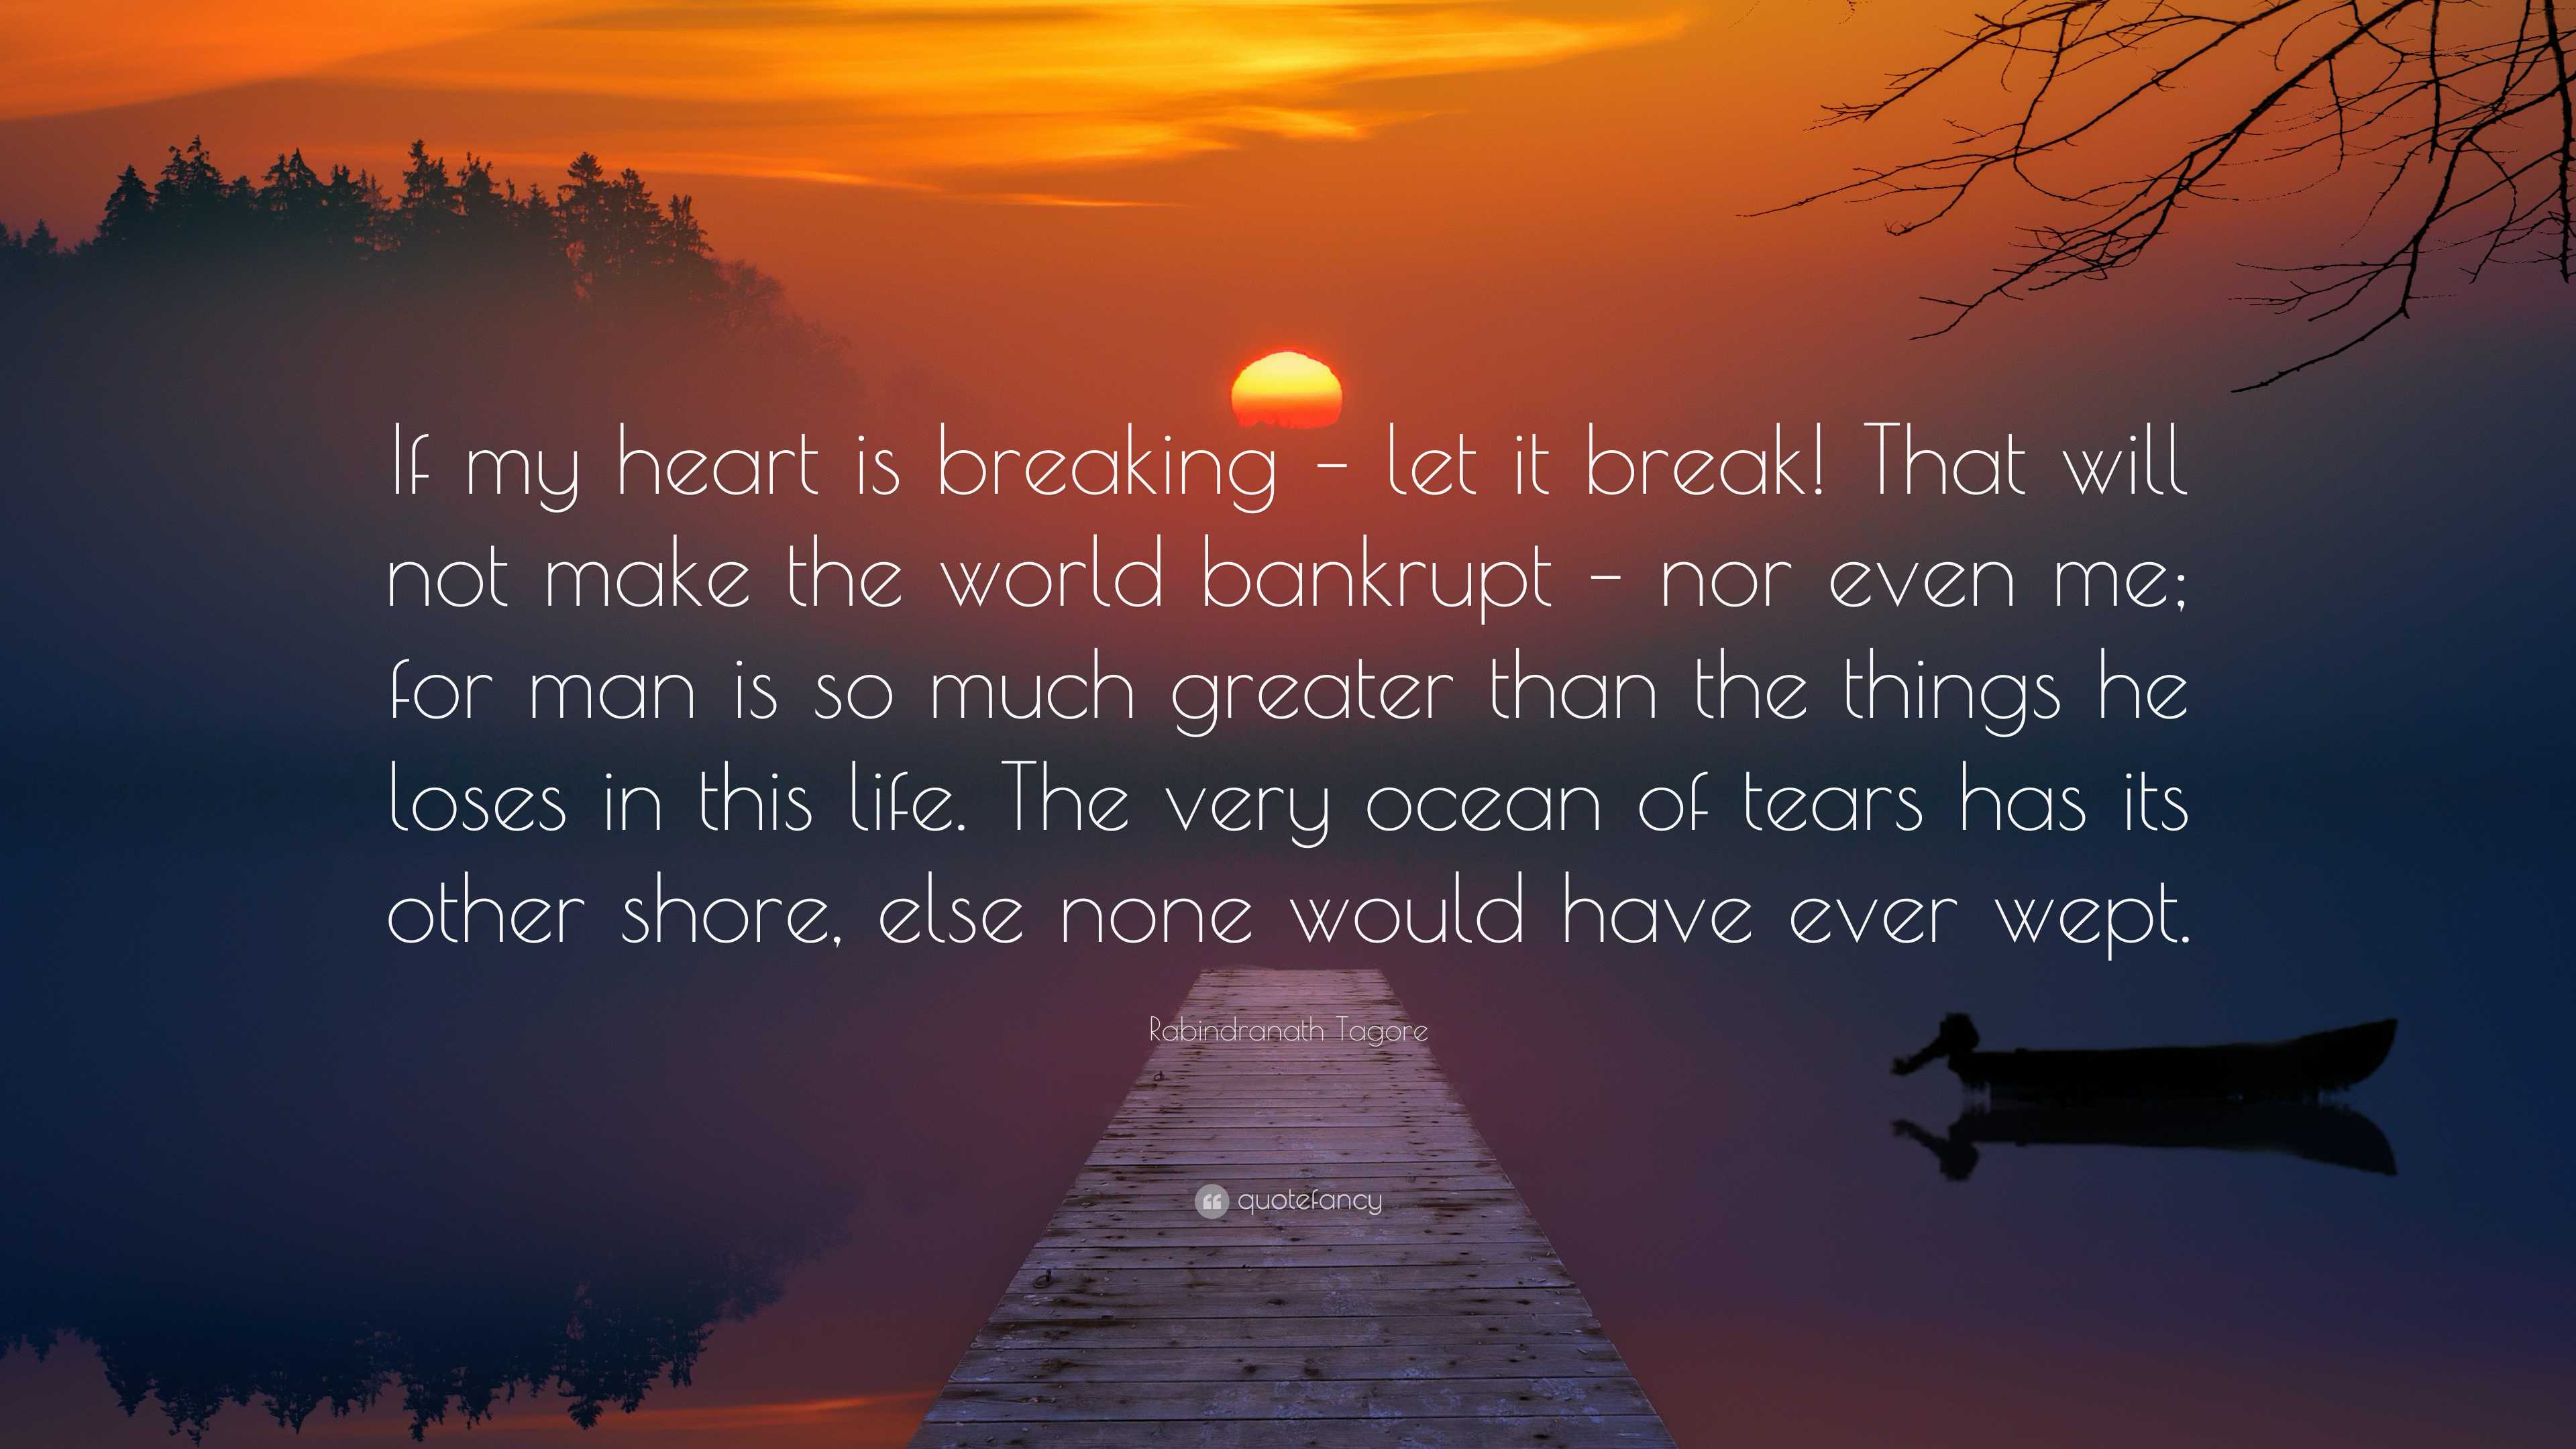 Rabindranath Tagore Quote: “If my heart is breaking – let it break ...